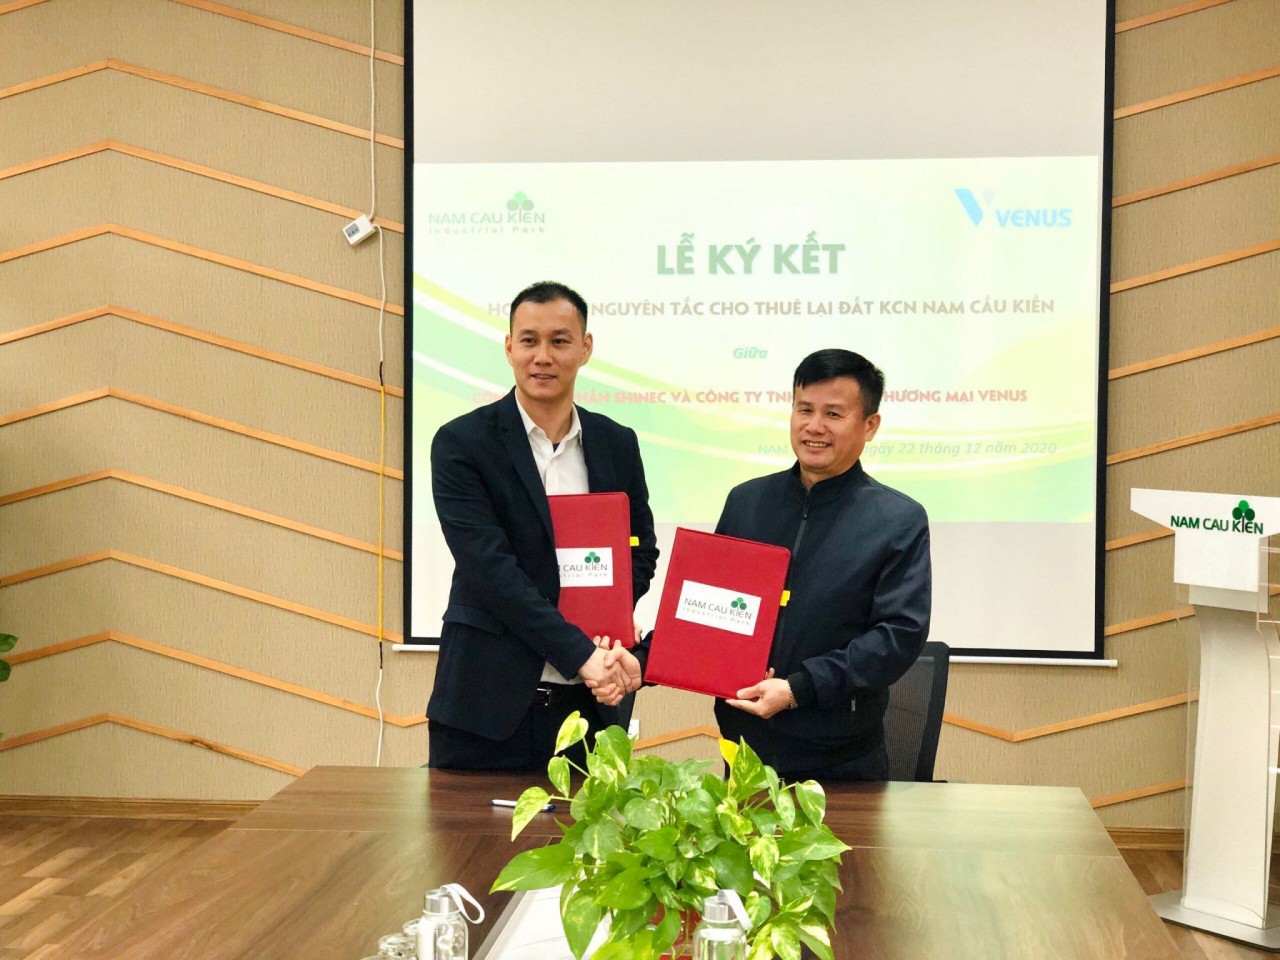 Despite the impact of the Covid-19 pandemic, Mr. Le Minh Khoa promoted the signing of a lease of land use right to build a factory in Nam Cau Kien Industrial Park, Hai Phong.